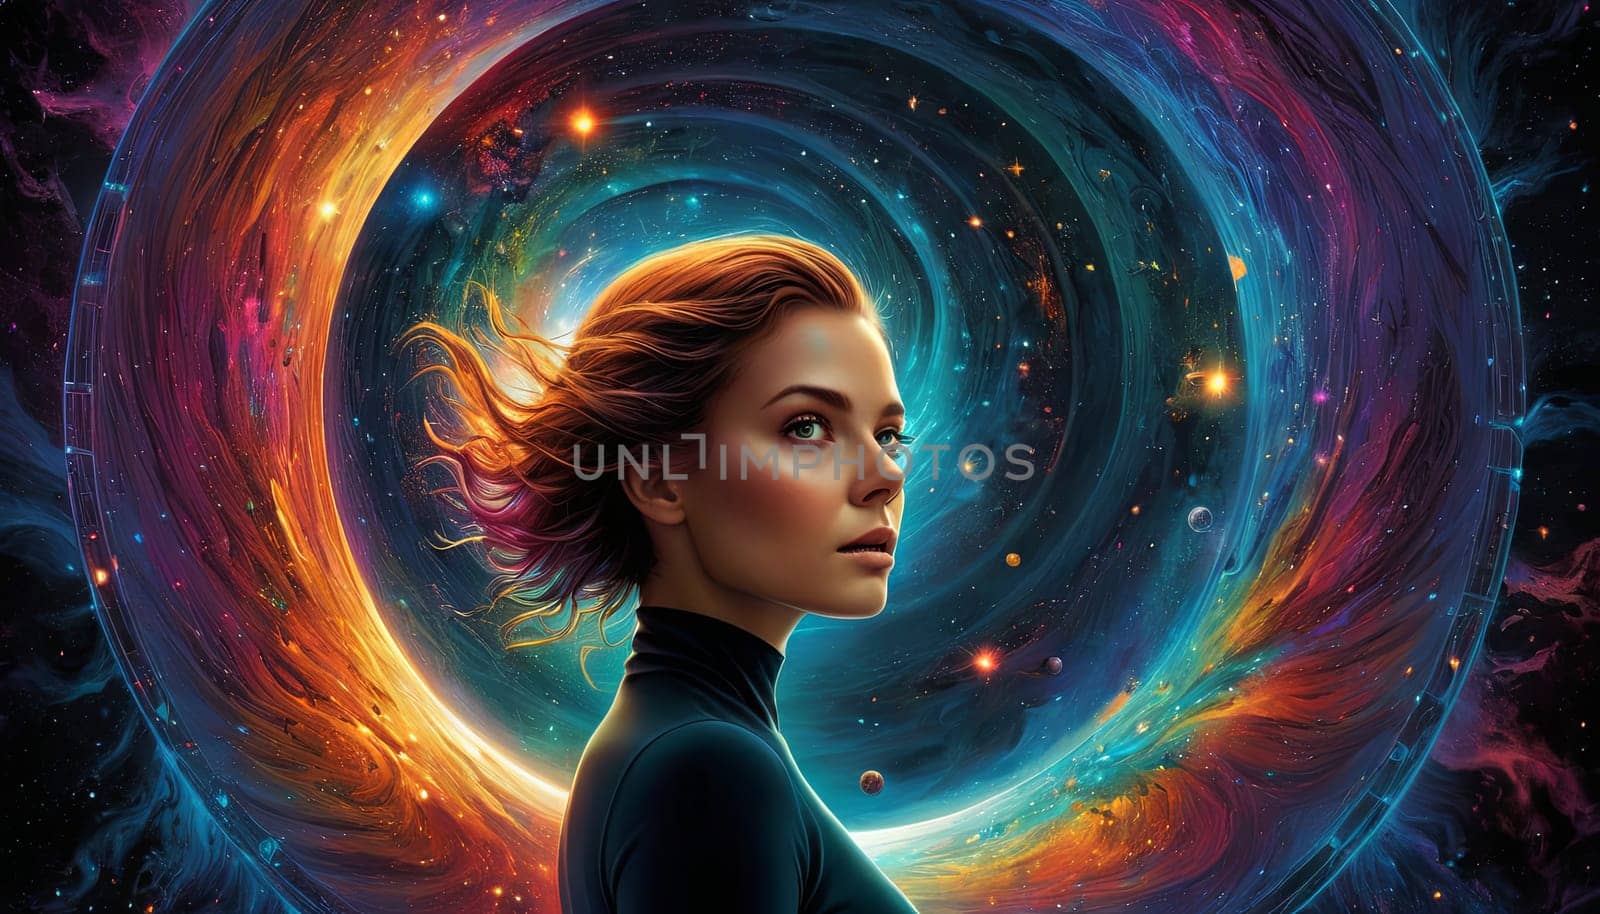 Woman amidst vibrant cosmic scenery, planets orbiting nearby. Represents intersection of humanity and infinite universe. Ideal for themes of exploration, mystery. by Matiunina